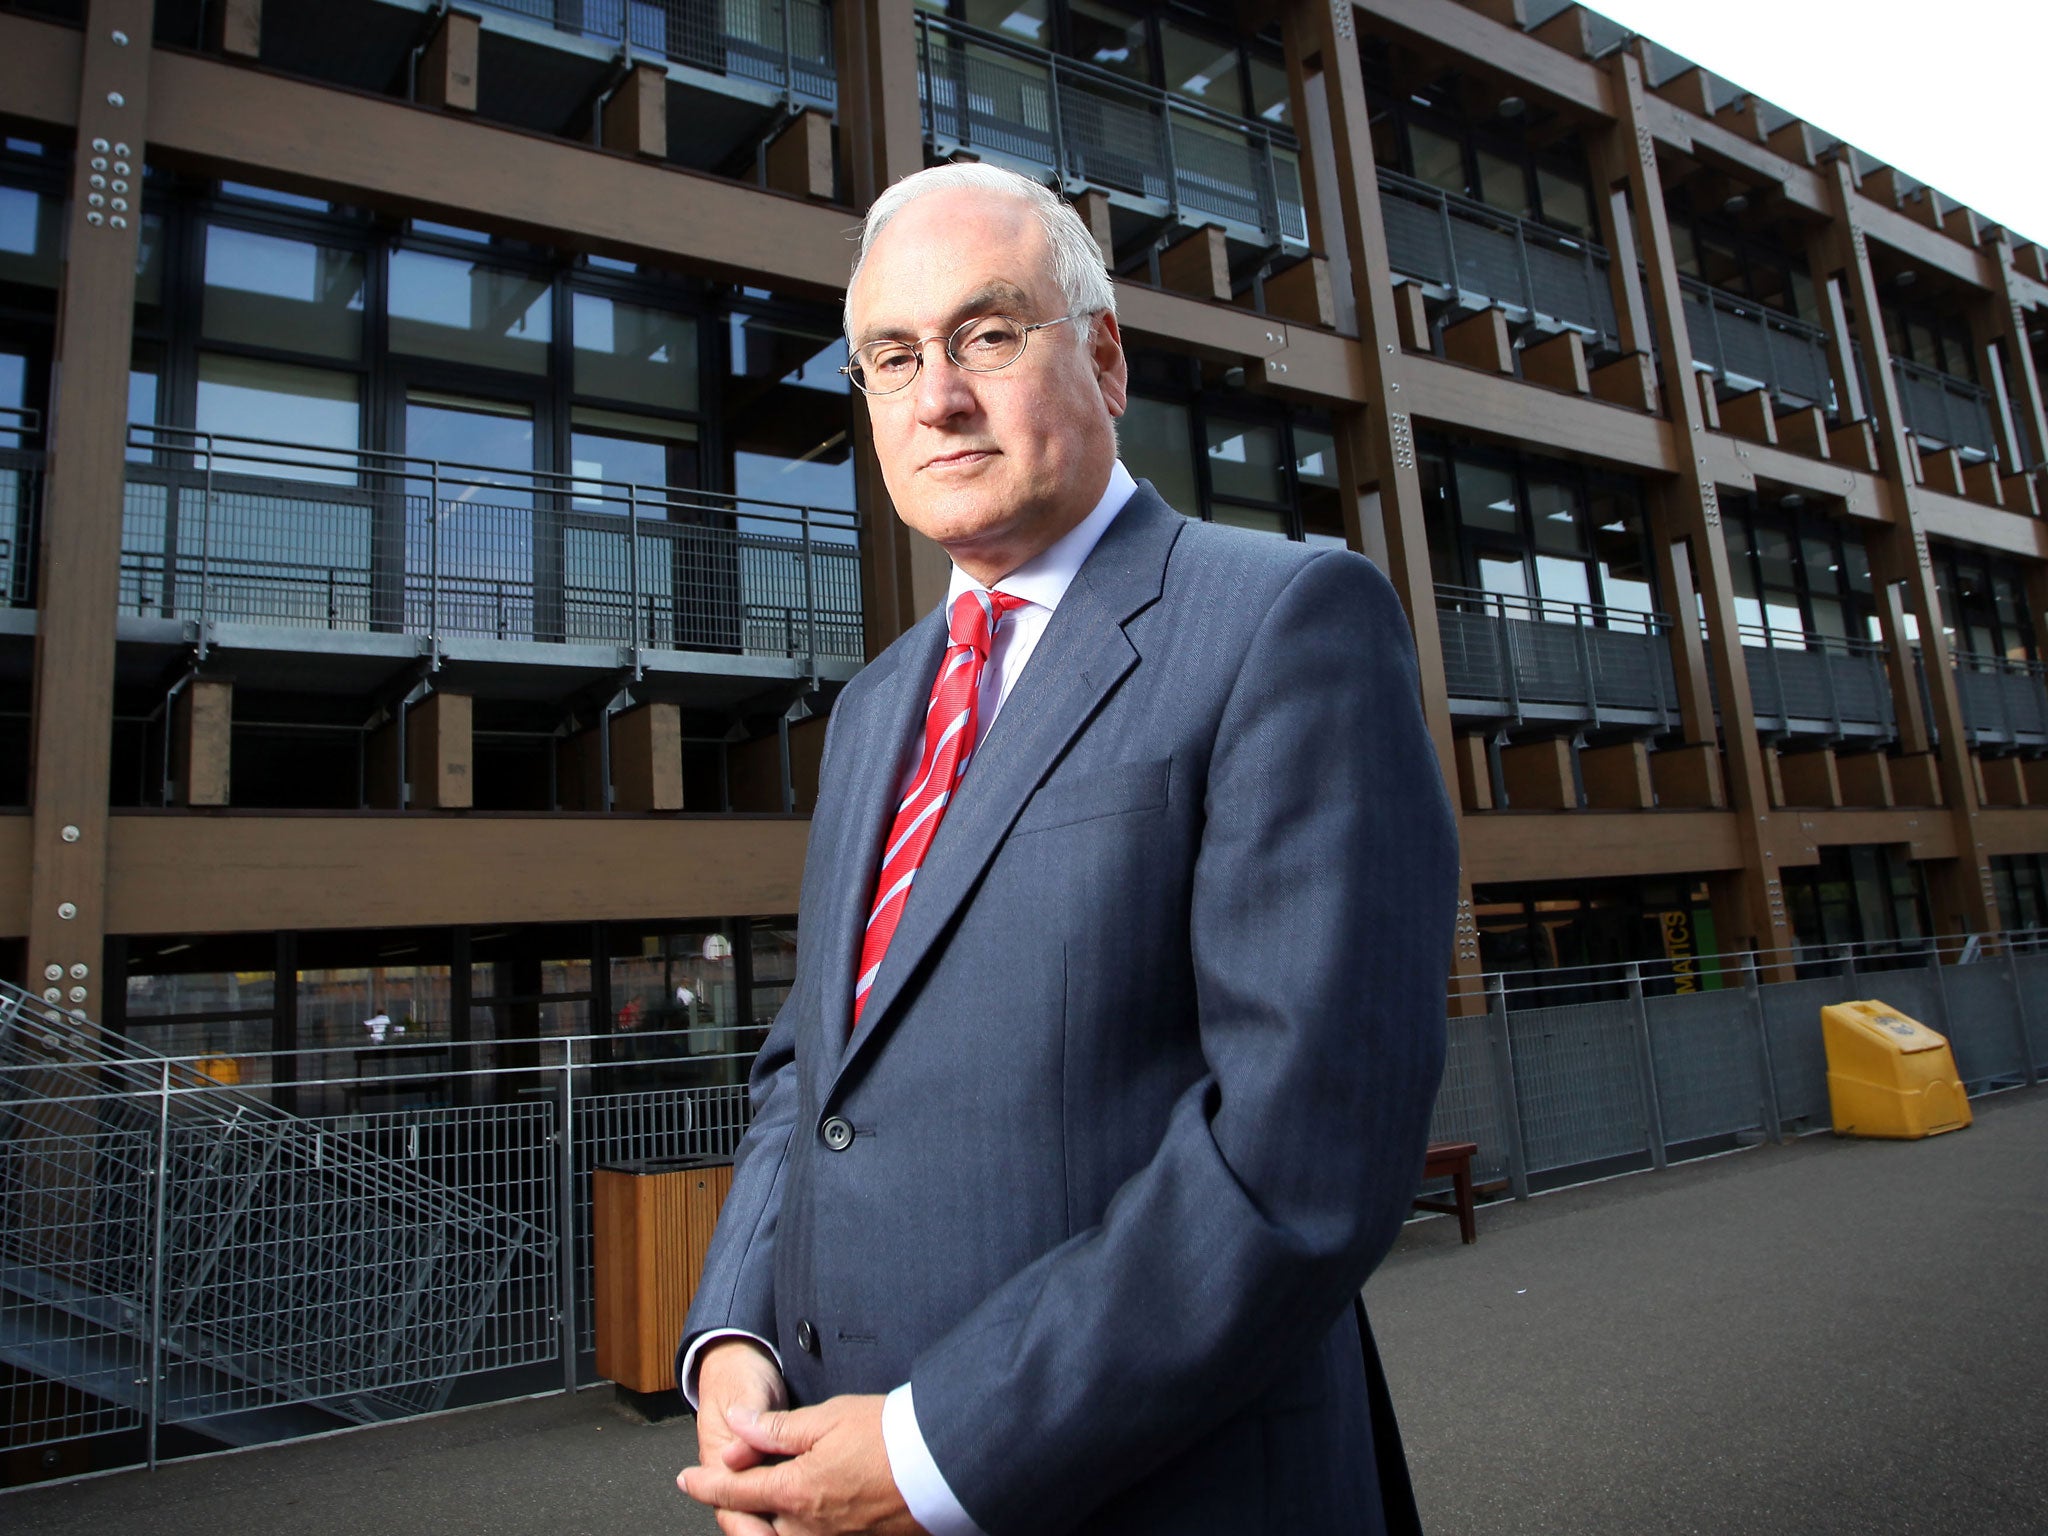 Sir Michael Wilshaw is to take personal charge of the investigation into claims that Muslim hardliners have taken over a number of schools in Birmingham and begun segregating boys and girls in class